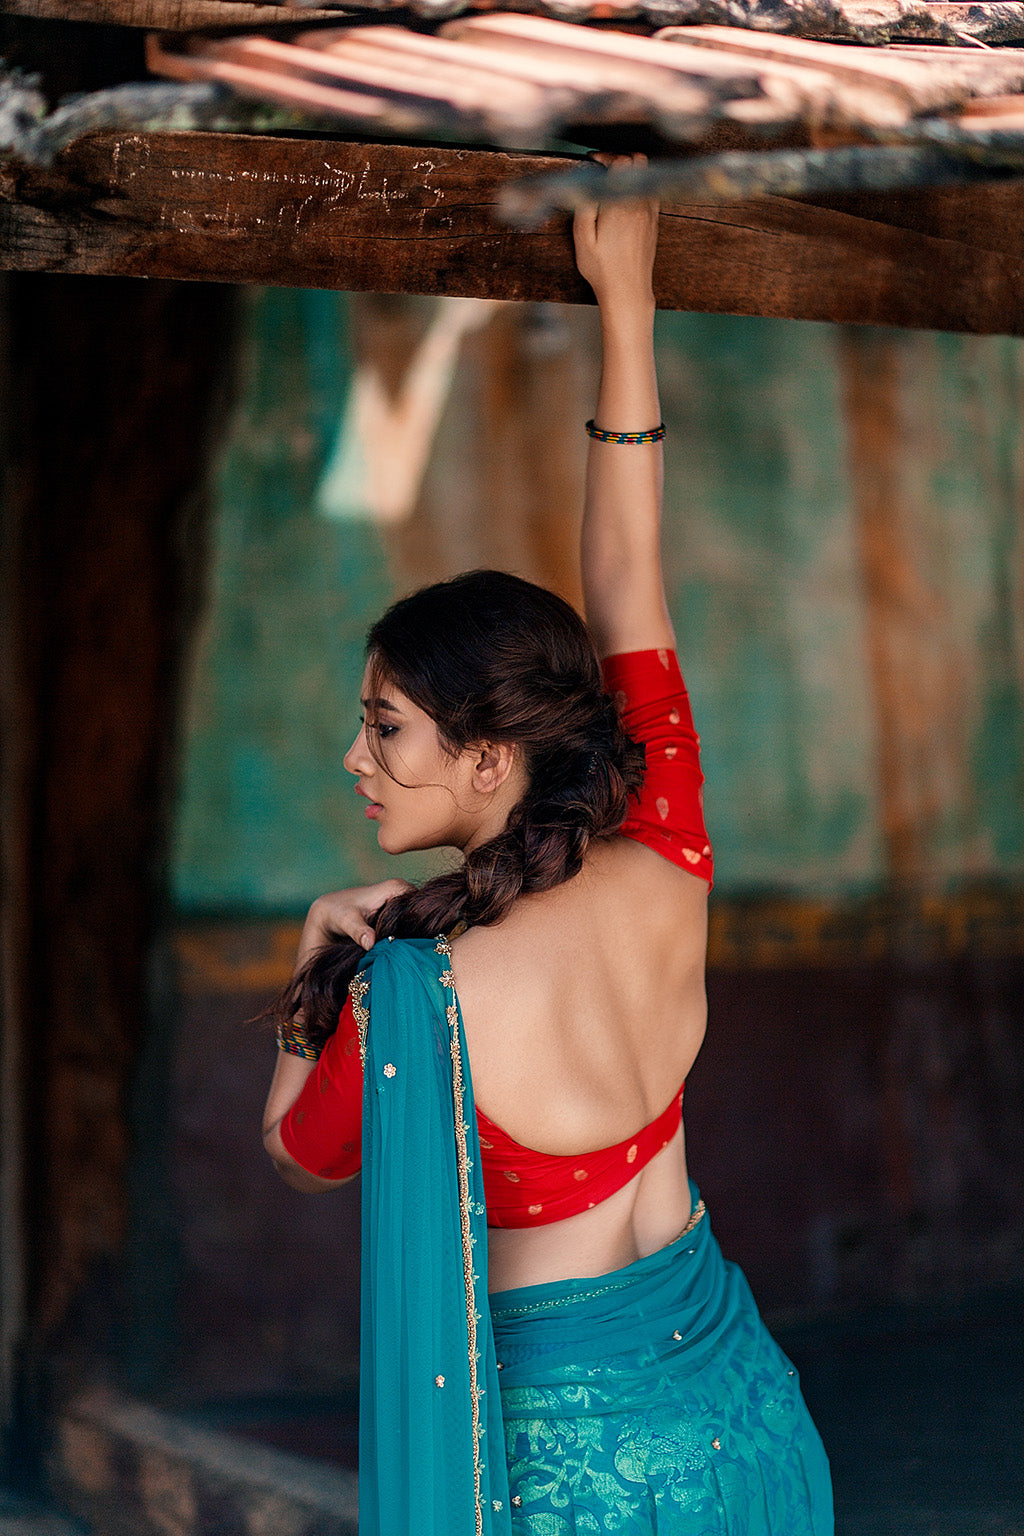 Sweetheart neck red brocade silk blouse with blue knife pleat kanchi silk skirt and blue tulle dupatta